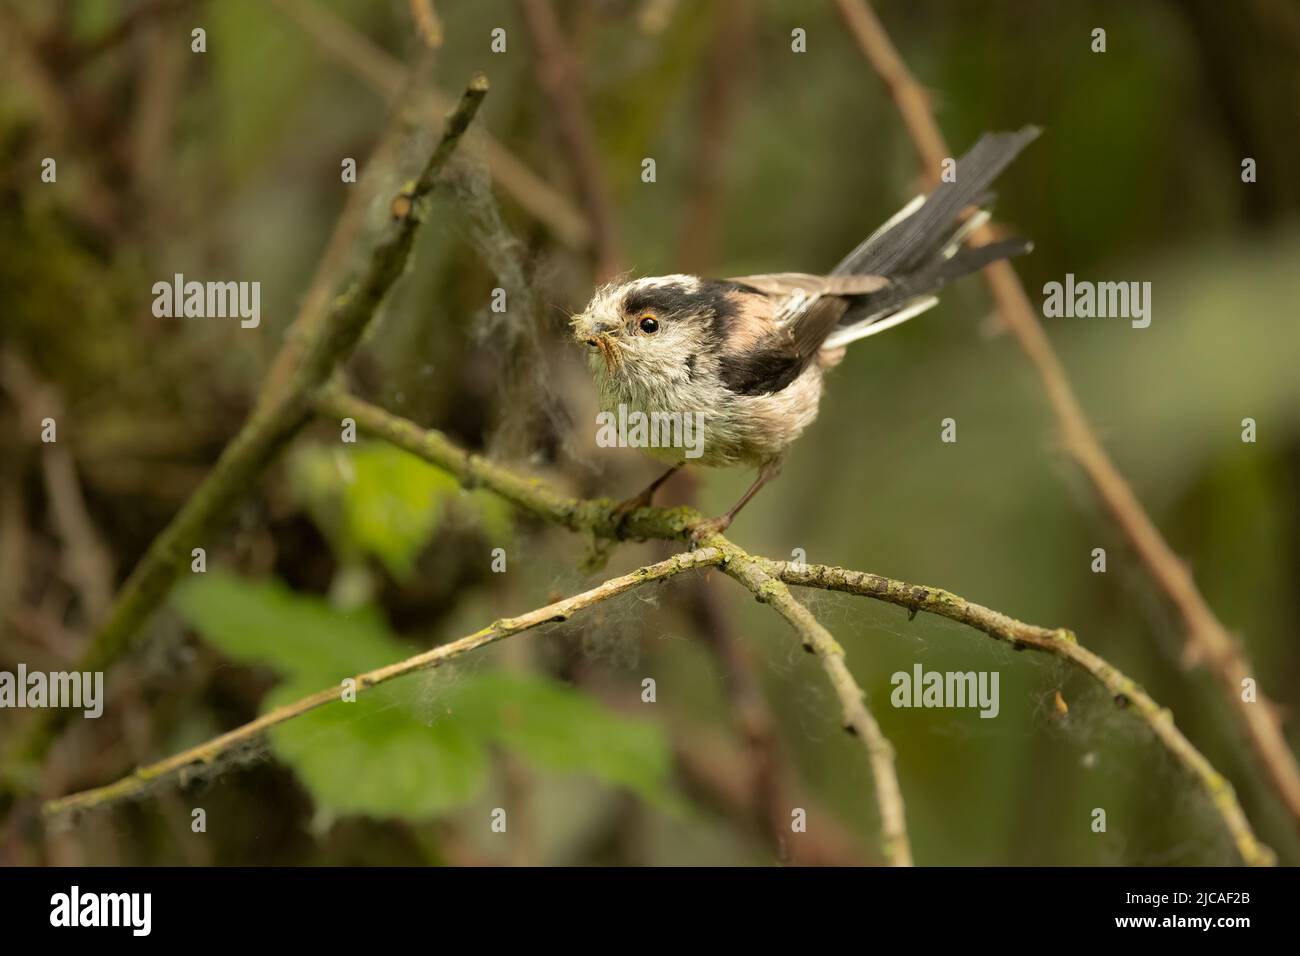 Adult long-tailed tit foraging for insects for its young, England, UK. Stock Photo